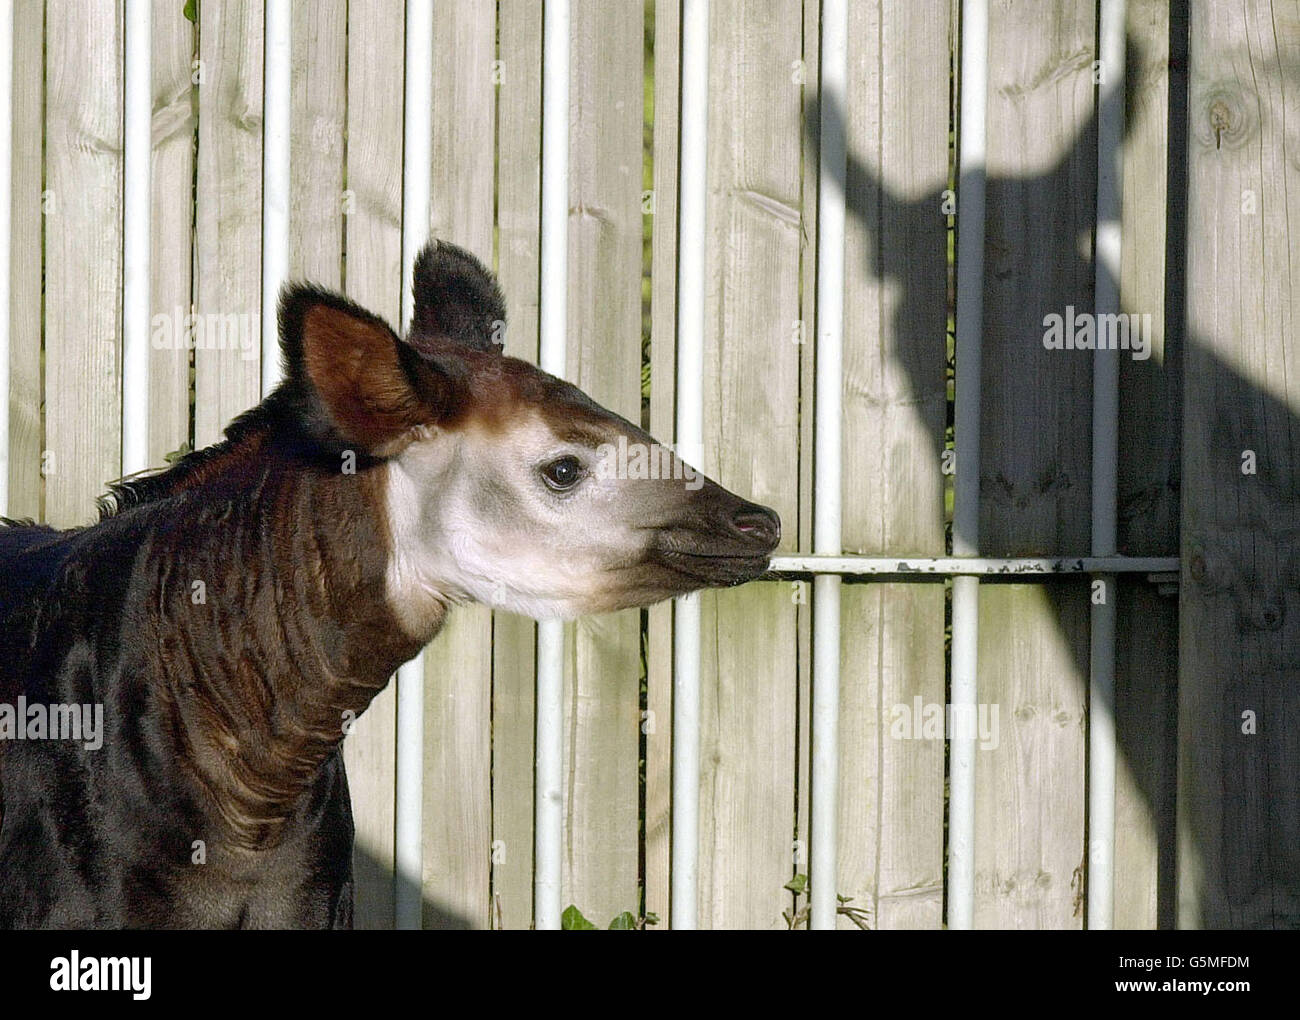 London Zoo's seven week old Okapi calf, Jemima, stays close to her mother Elila in their paddock. The birth of the Okapi - a relative of the Giraffe - coincides with the 100th anniversary of the species which was discovered in central Africa in 1901. Stock Photo